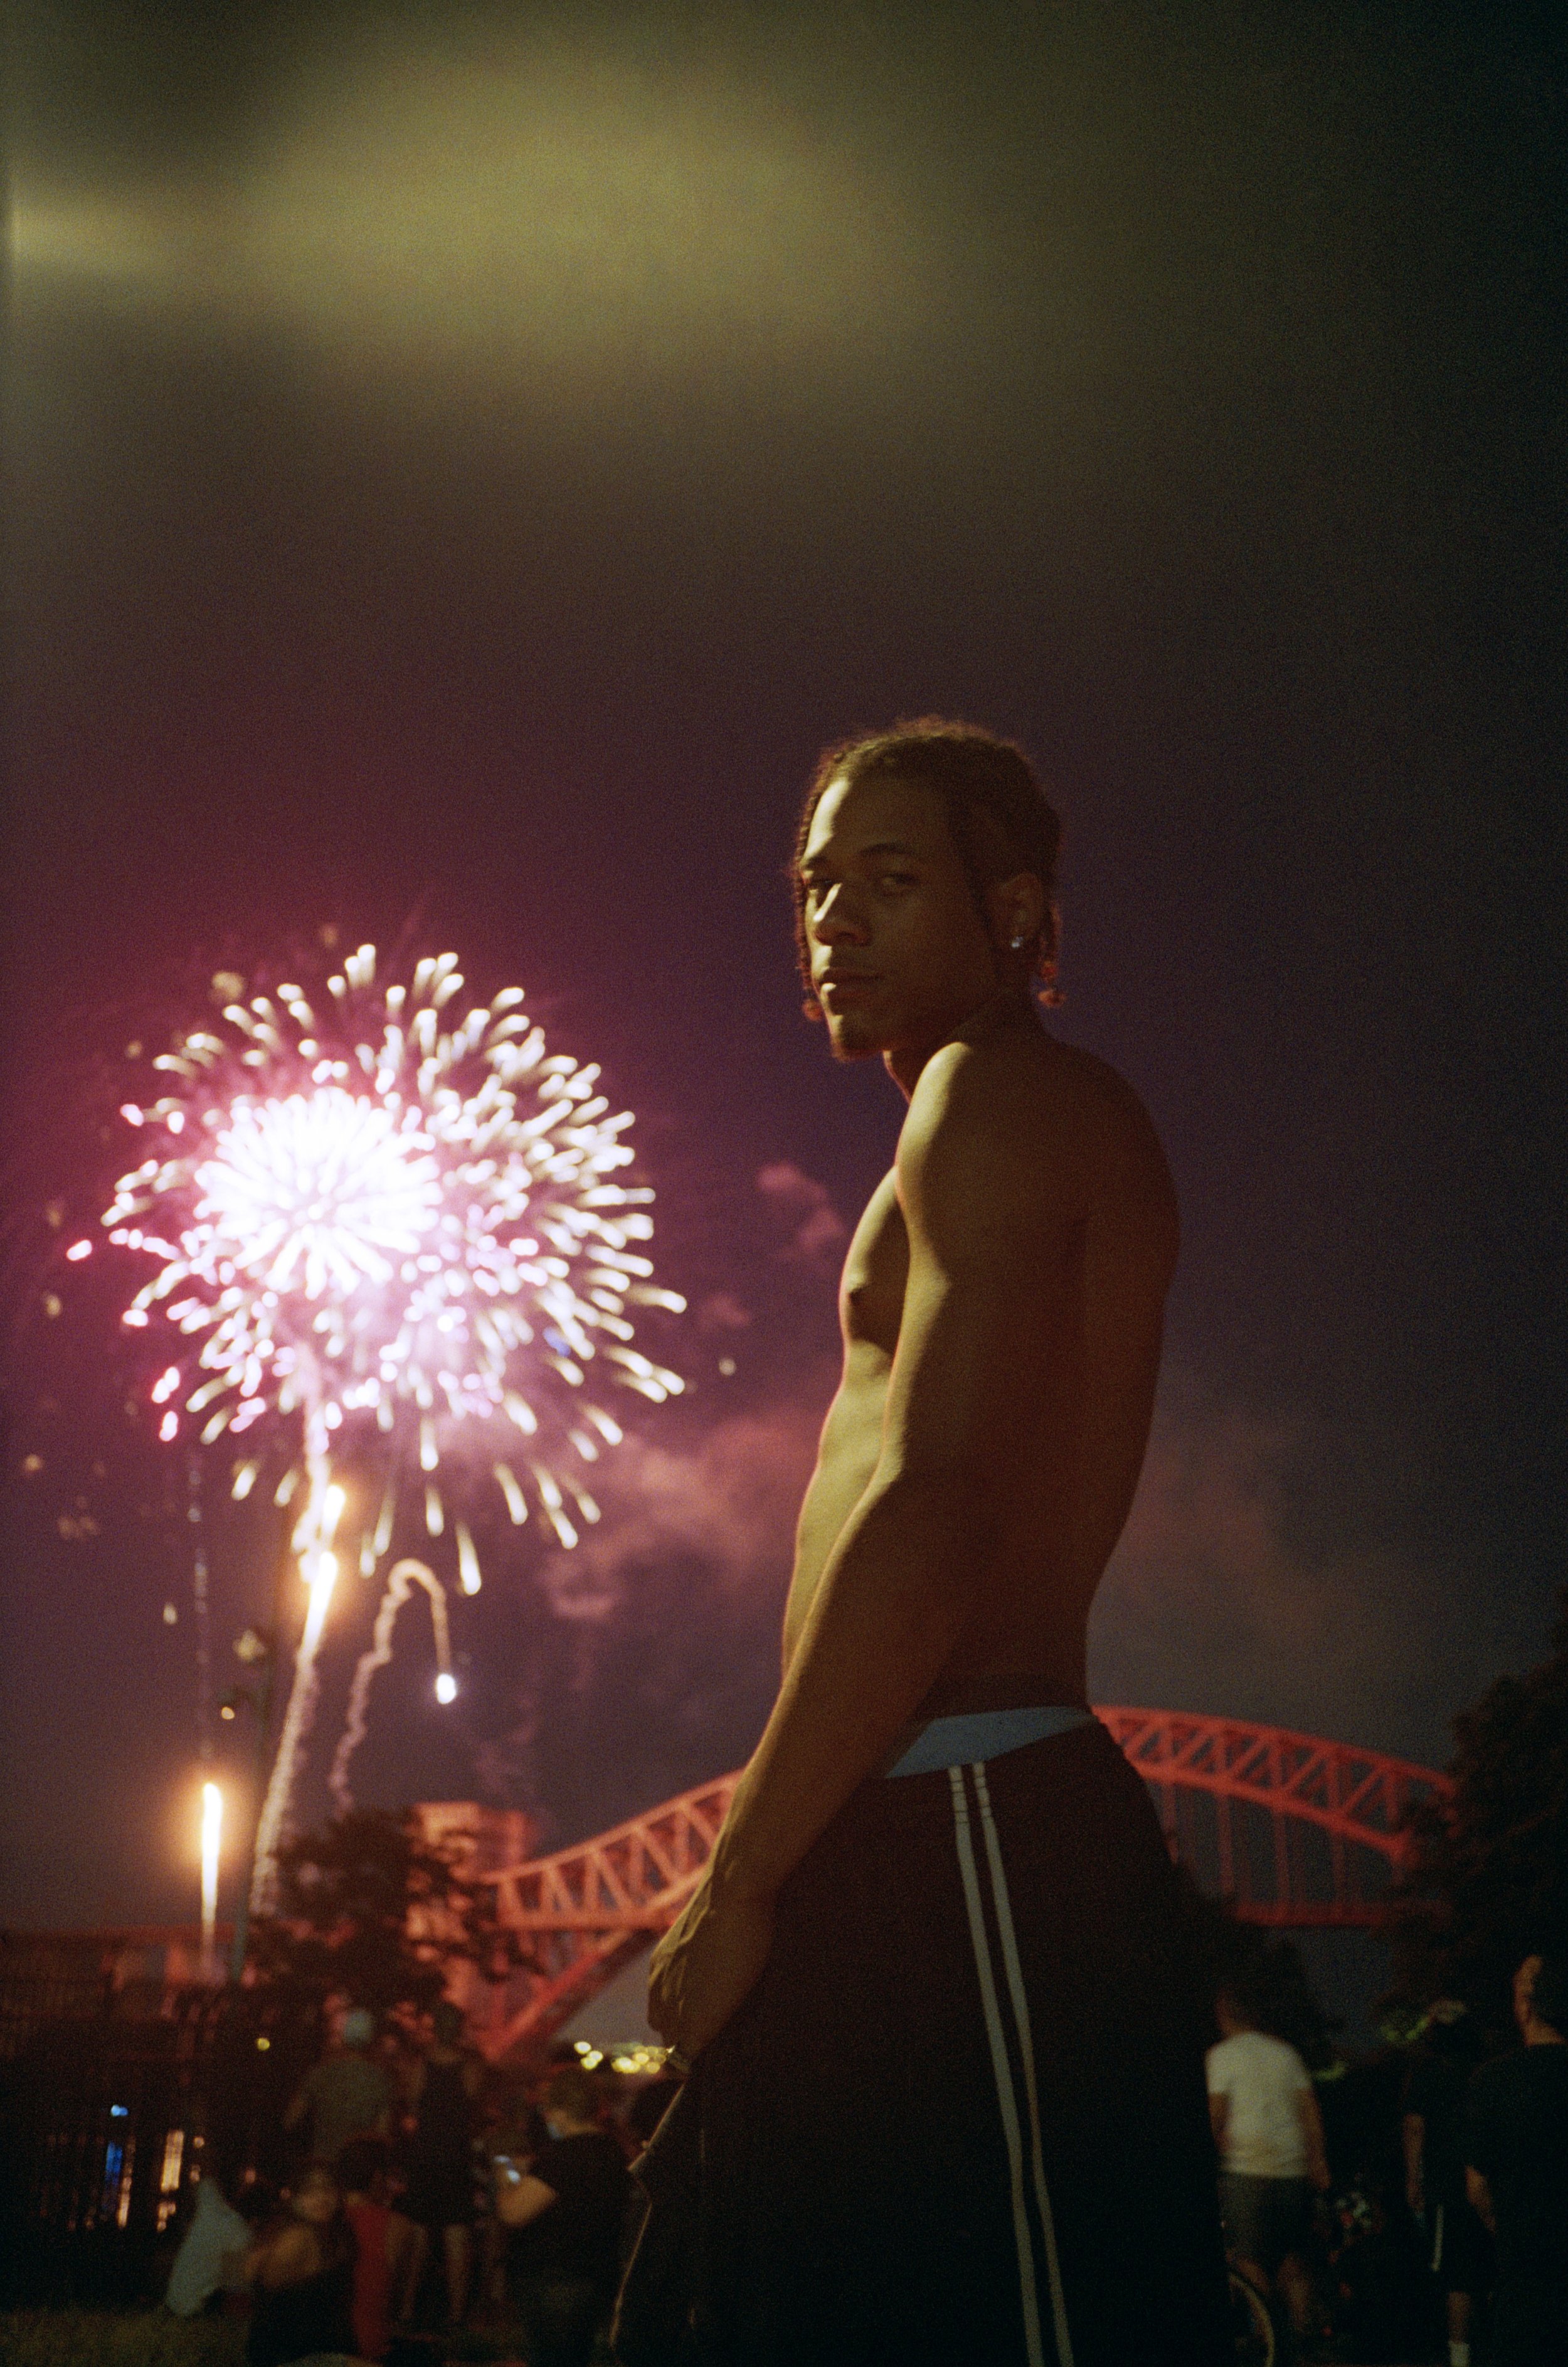 bryan at astoria park for the yearly fireworks show, 2021